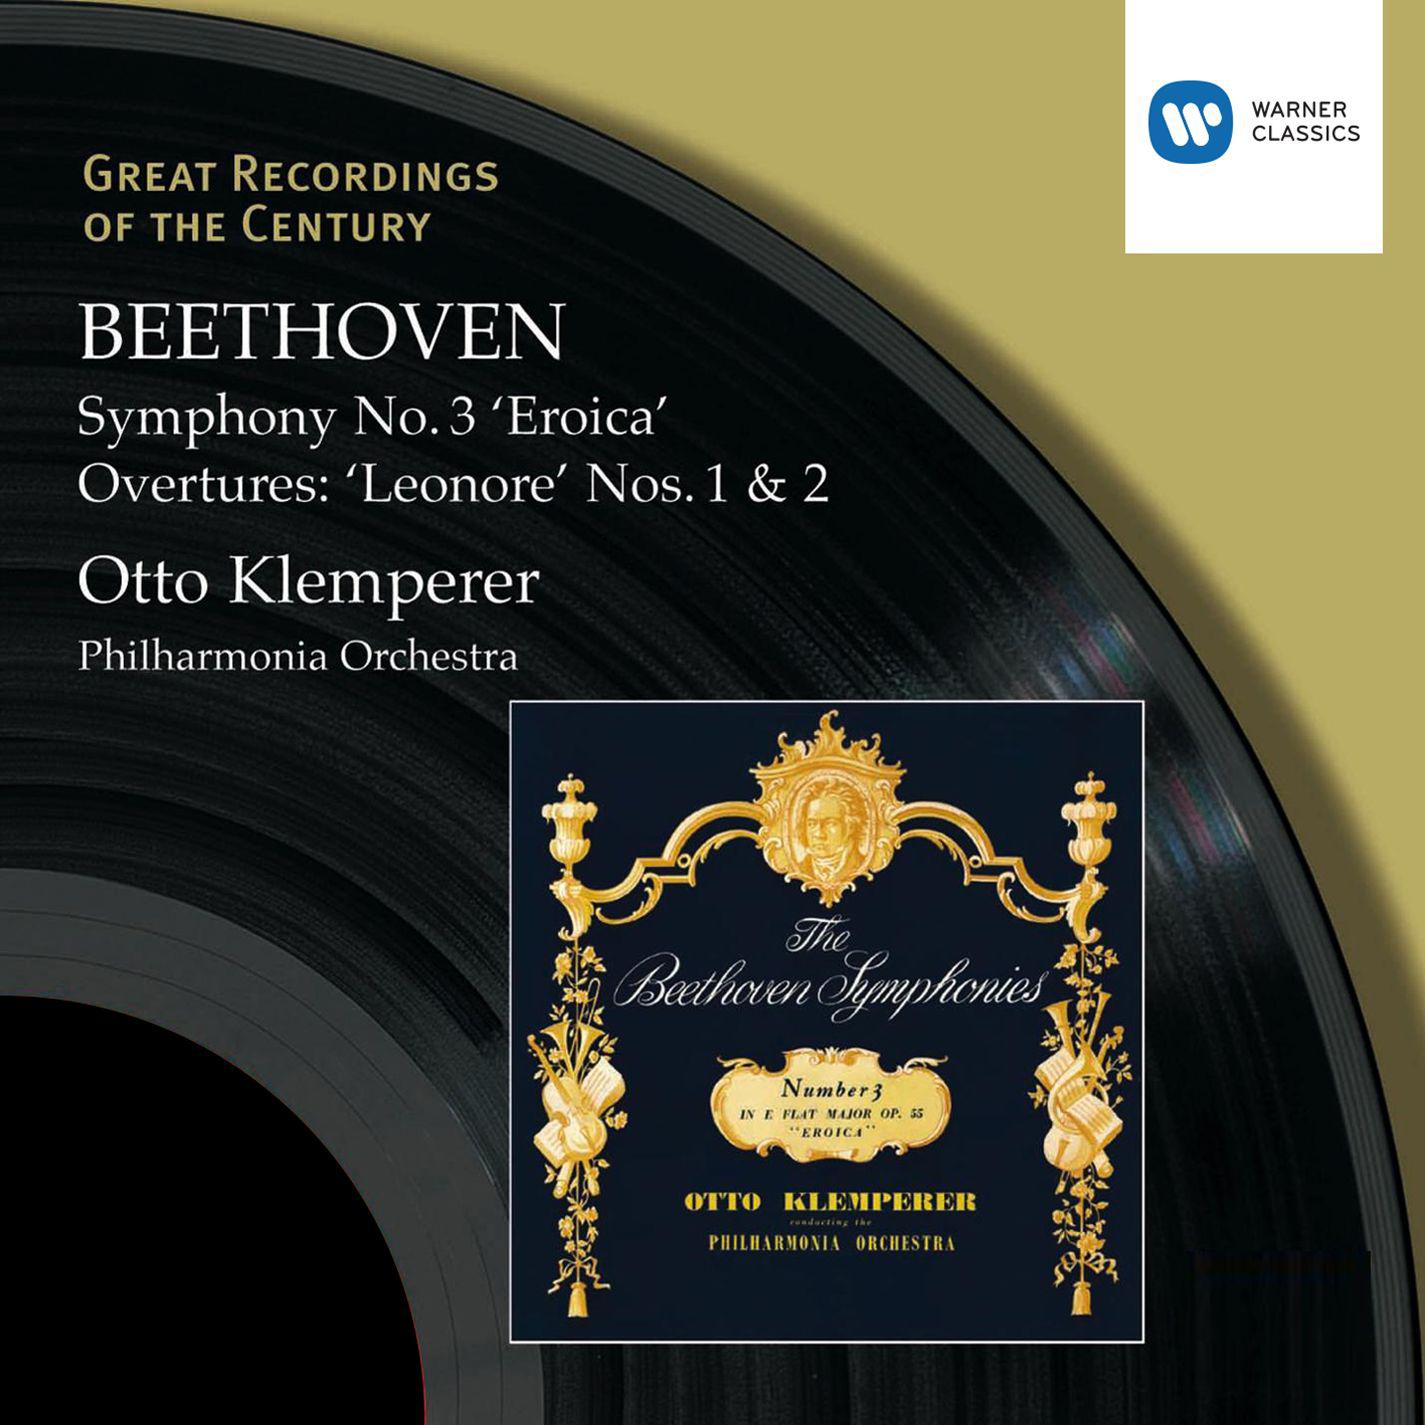 Beethoven: Symphony No. 3 "Eroica" - Overtures: "Leonore" Nos. 1 & 2